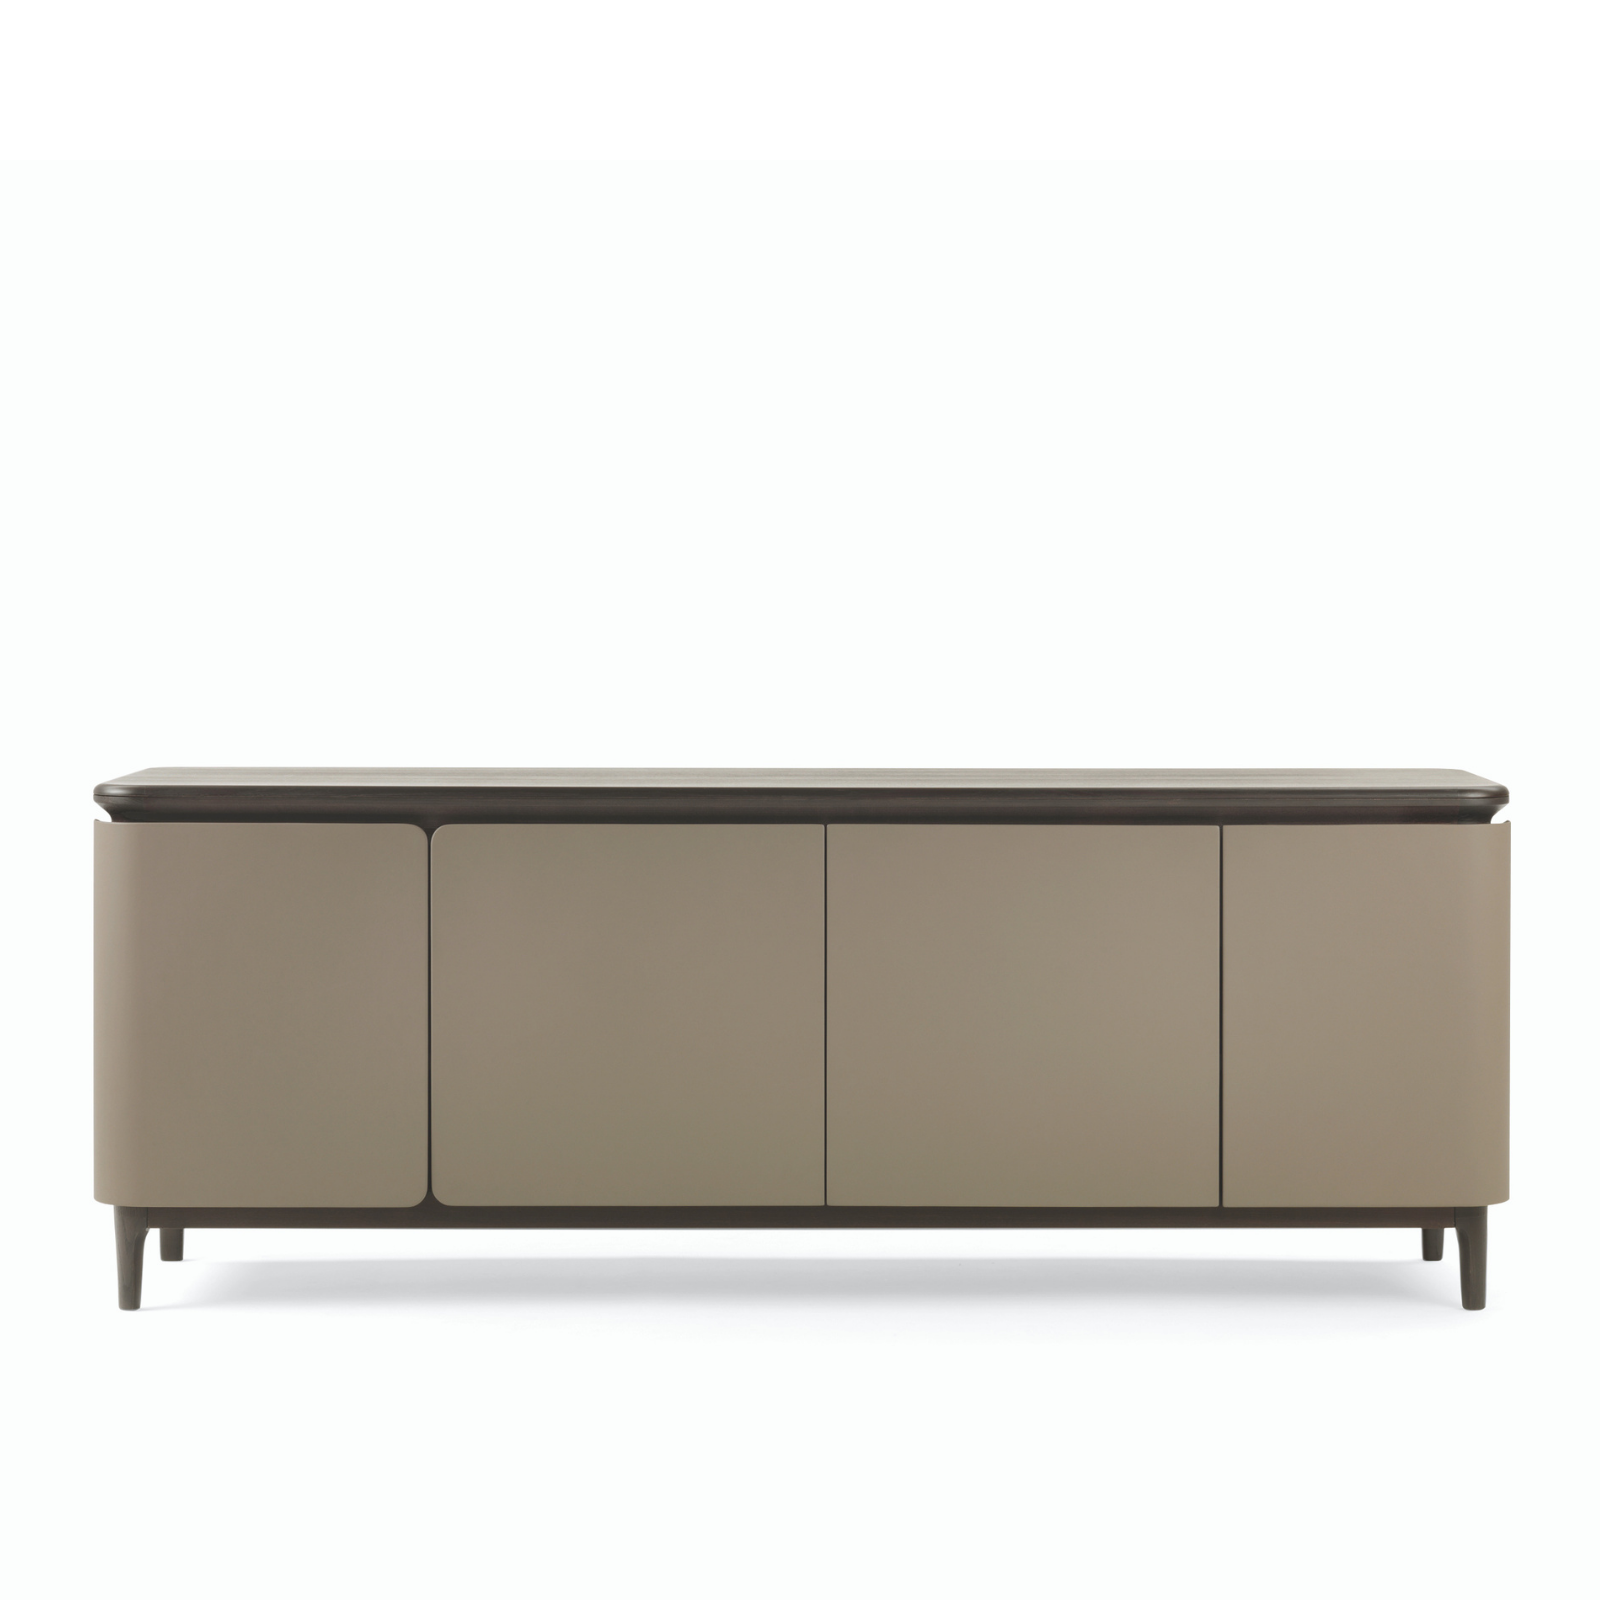 Manda sideboard is characterized by a great compositional versatility: doors, drawers and shelves combine harmoniously, creating an ideal complement of dining tables.